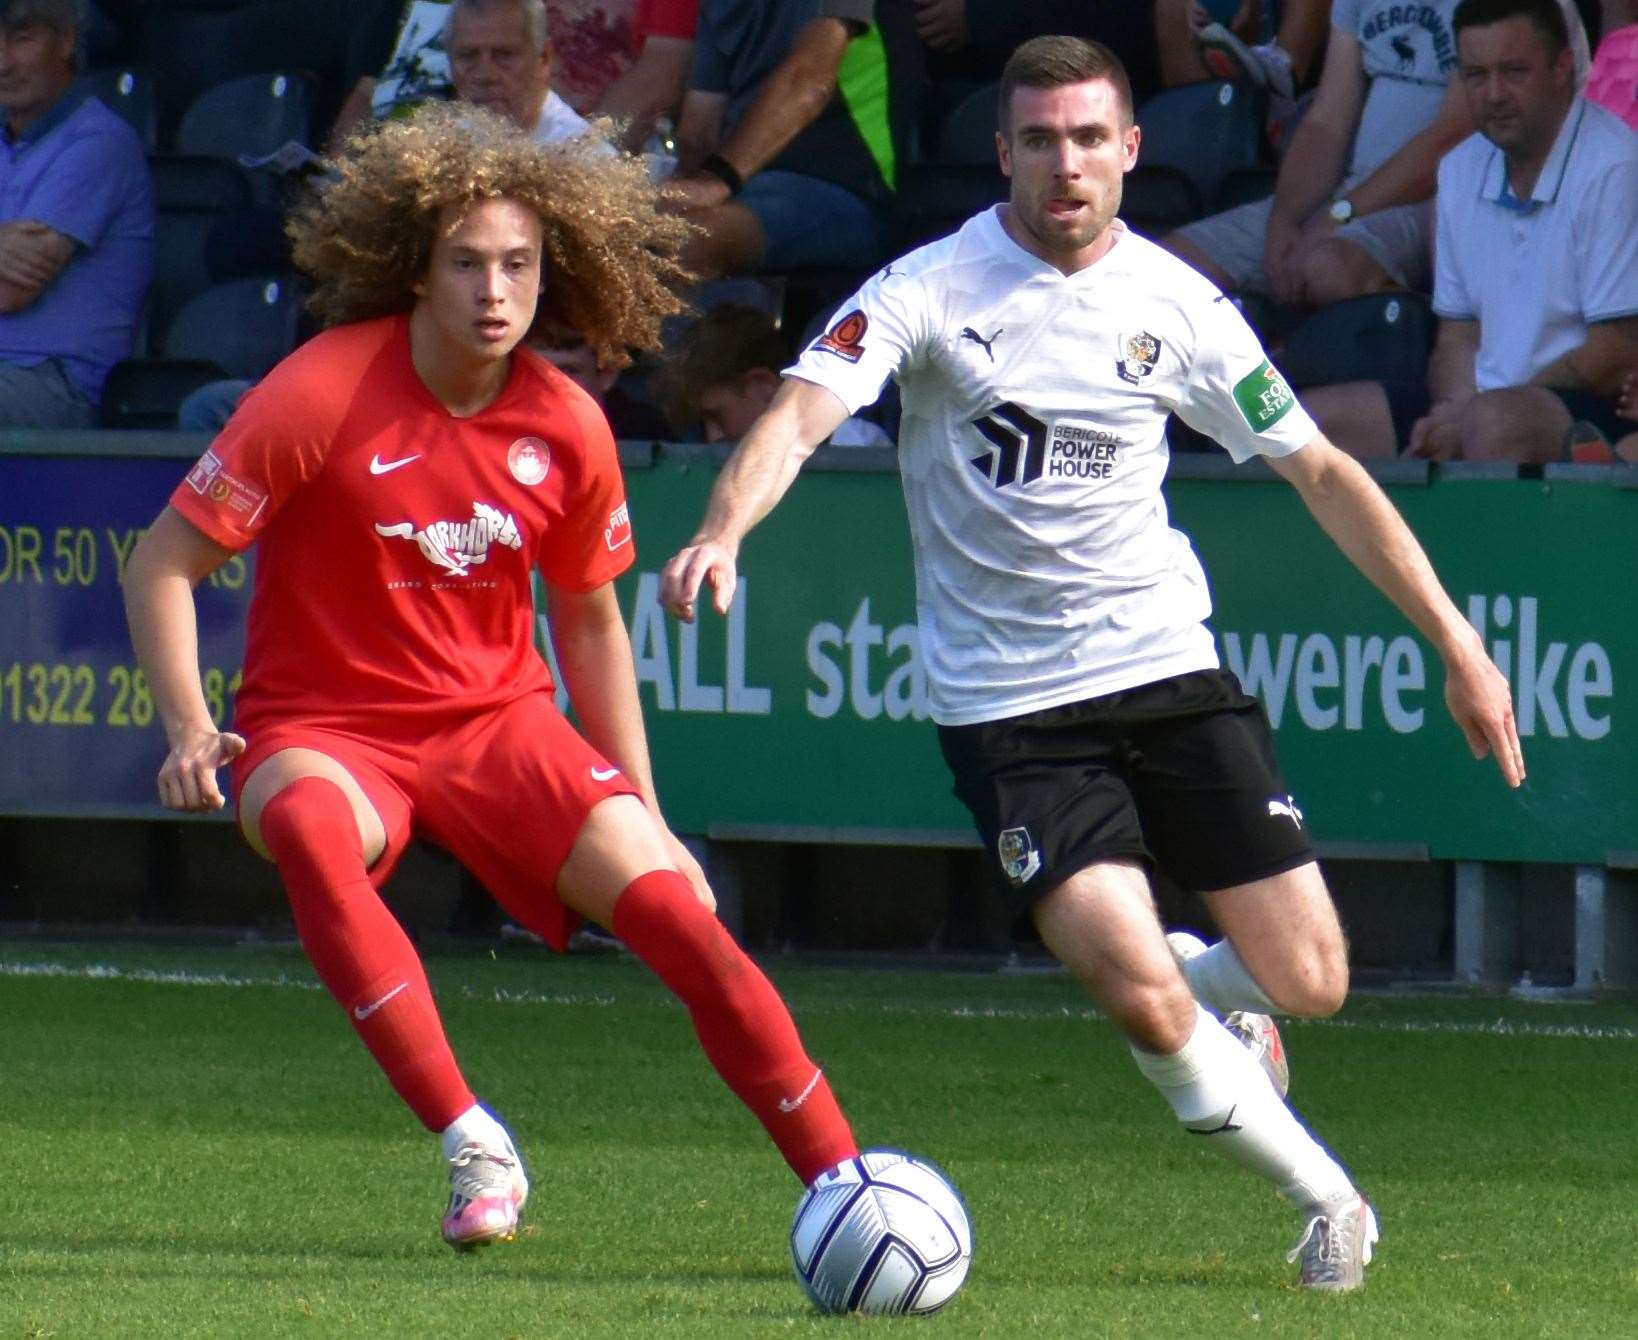 Danny Leonard is closed down by Jarred Trespaderne as Dartford take on Hythe in the FA Cup second qualifying round this season. Picture: Randolph File (52237733)